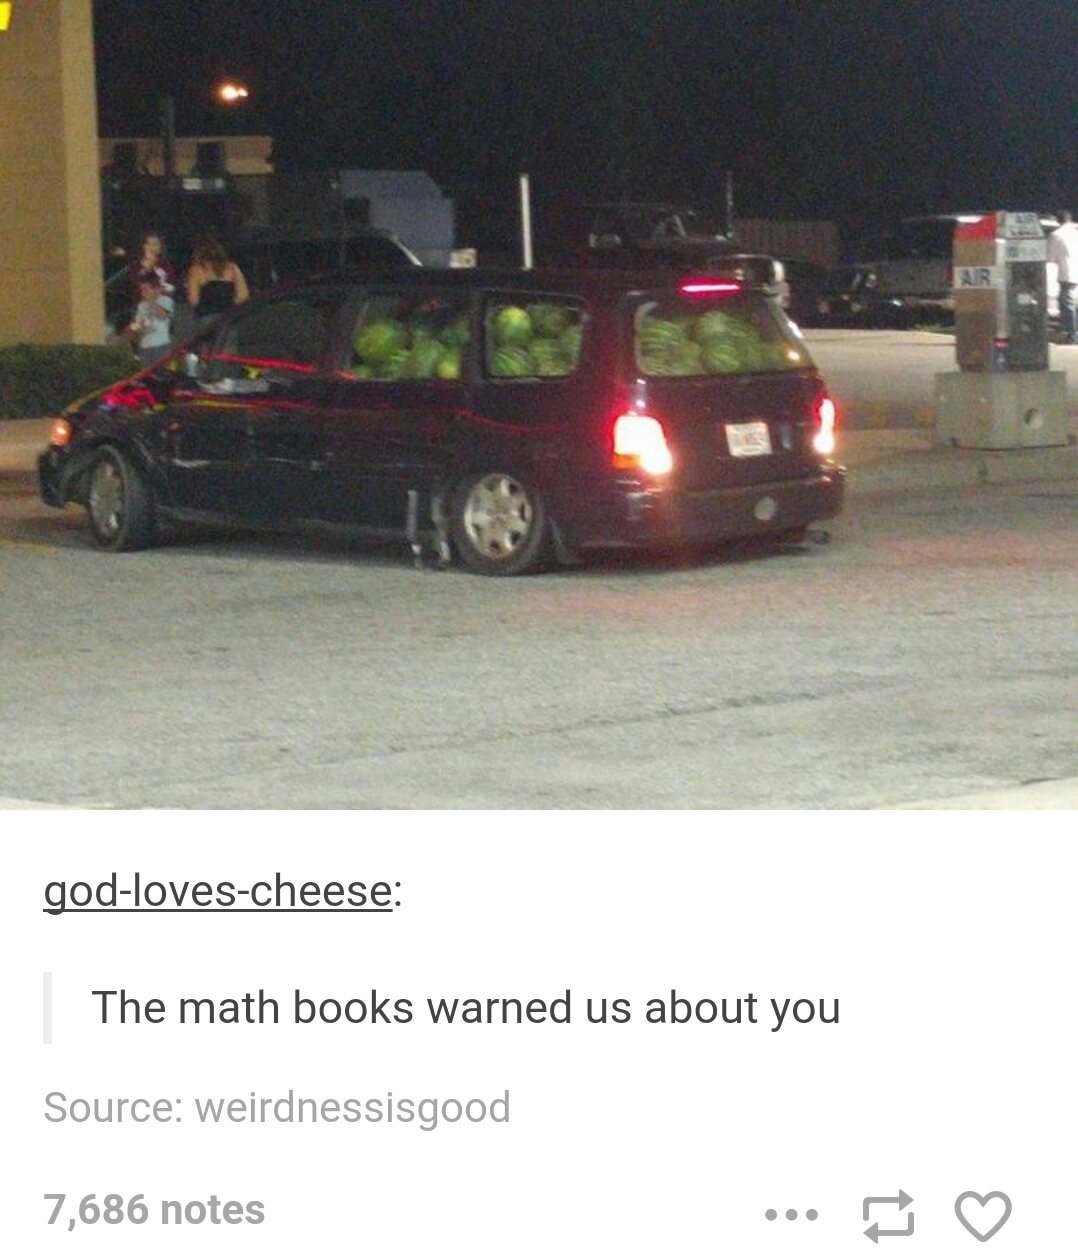 watermelons in car meme - godlovescheese The math books warned us about you Source weirdnessisgood 7,686 notes